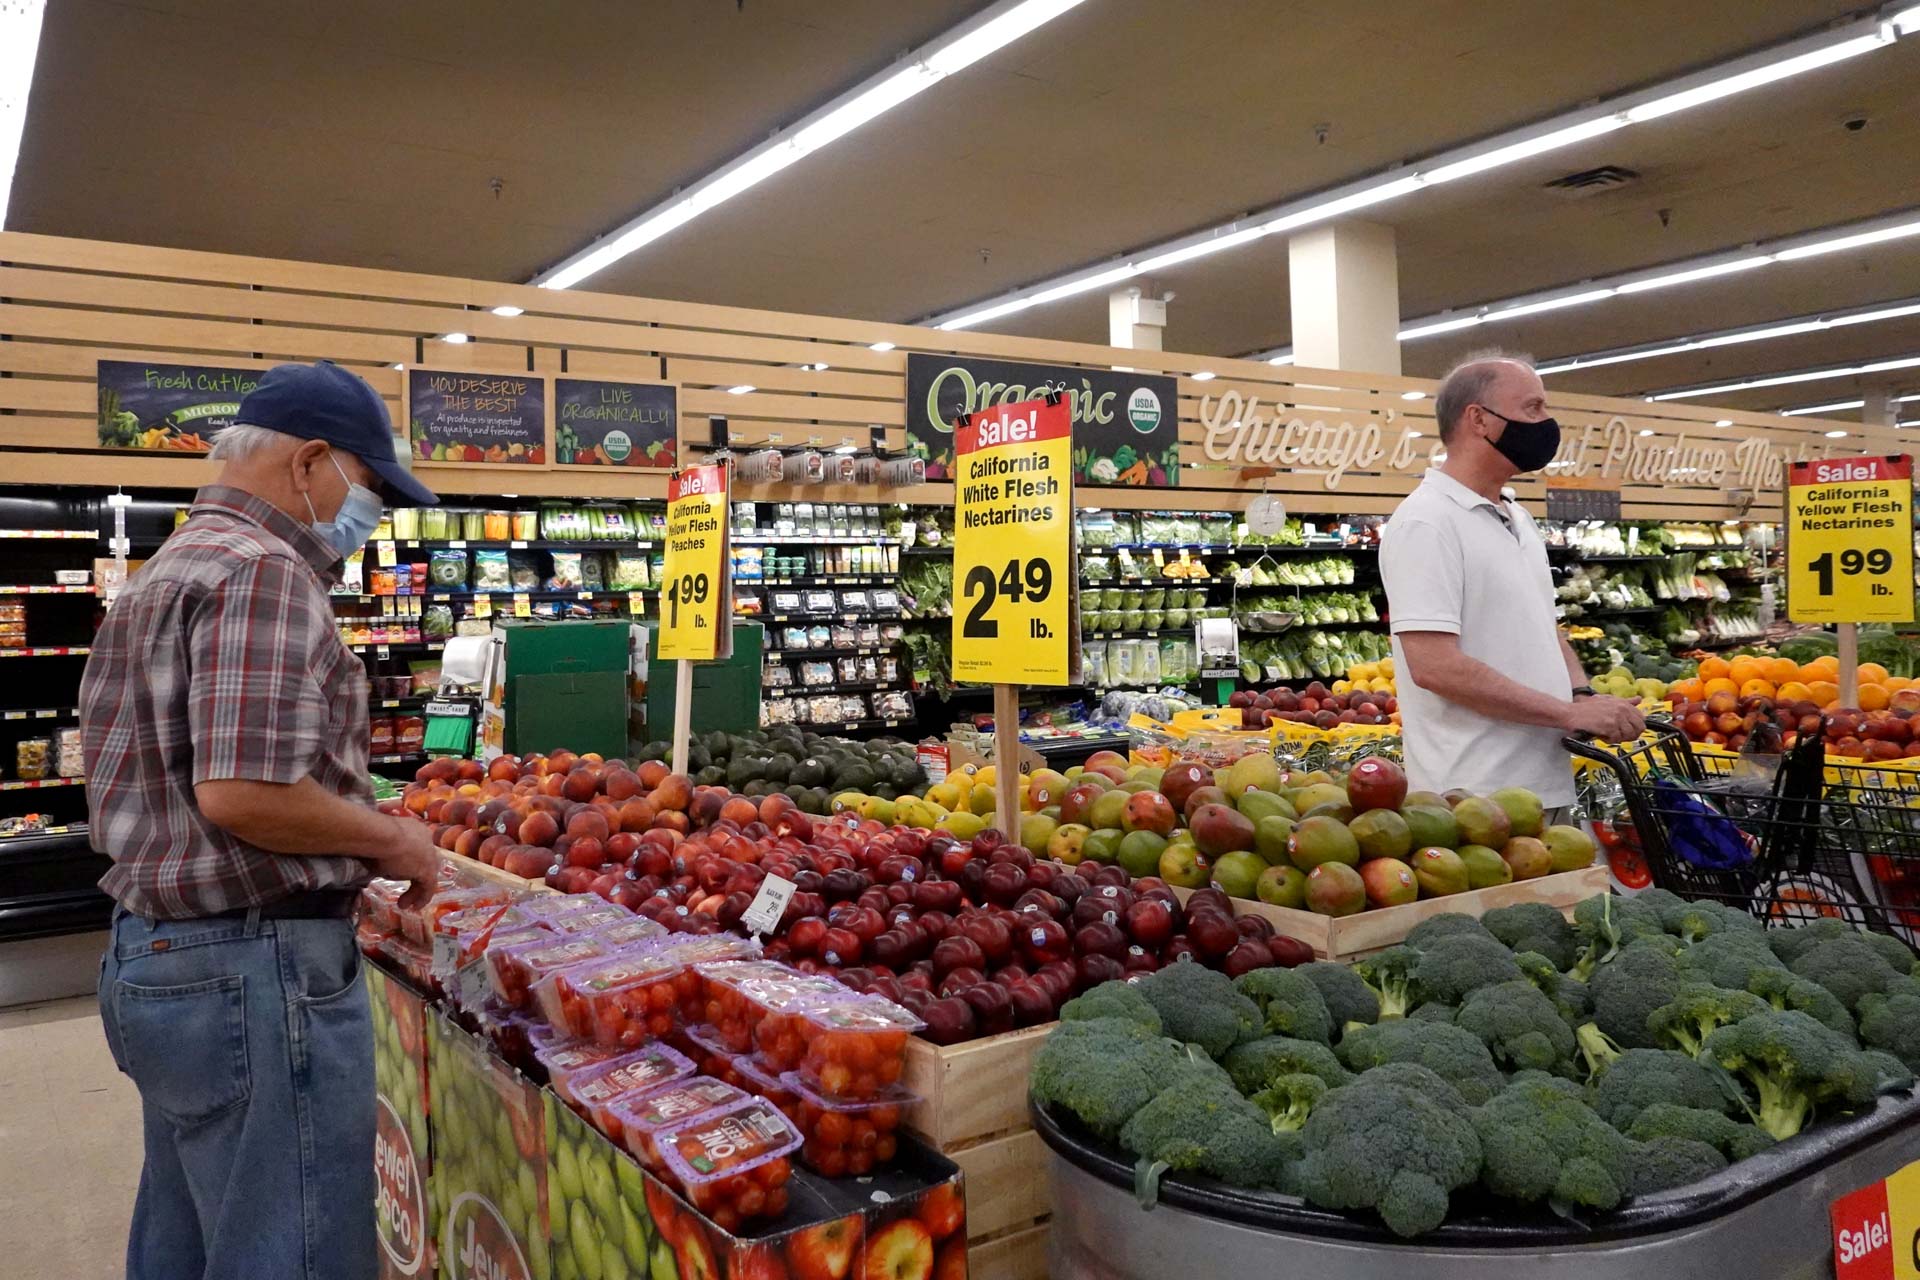 CHICAGO, ILLINOIS - JUNE 10: Customers shop for produce at a supermarket on June 10, 2021 in Chicago, Illinois. Inflation rose 5% in the 12-month period ending in May, the biggest jump since August 2008. Food prices rose 2.2 percent for the same period.  (Photo by Scott Olson/Getty Images)